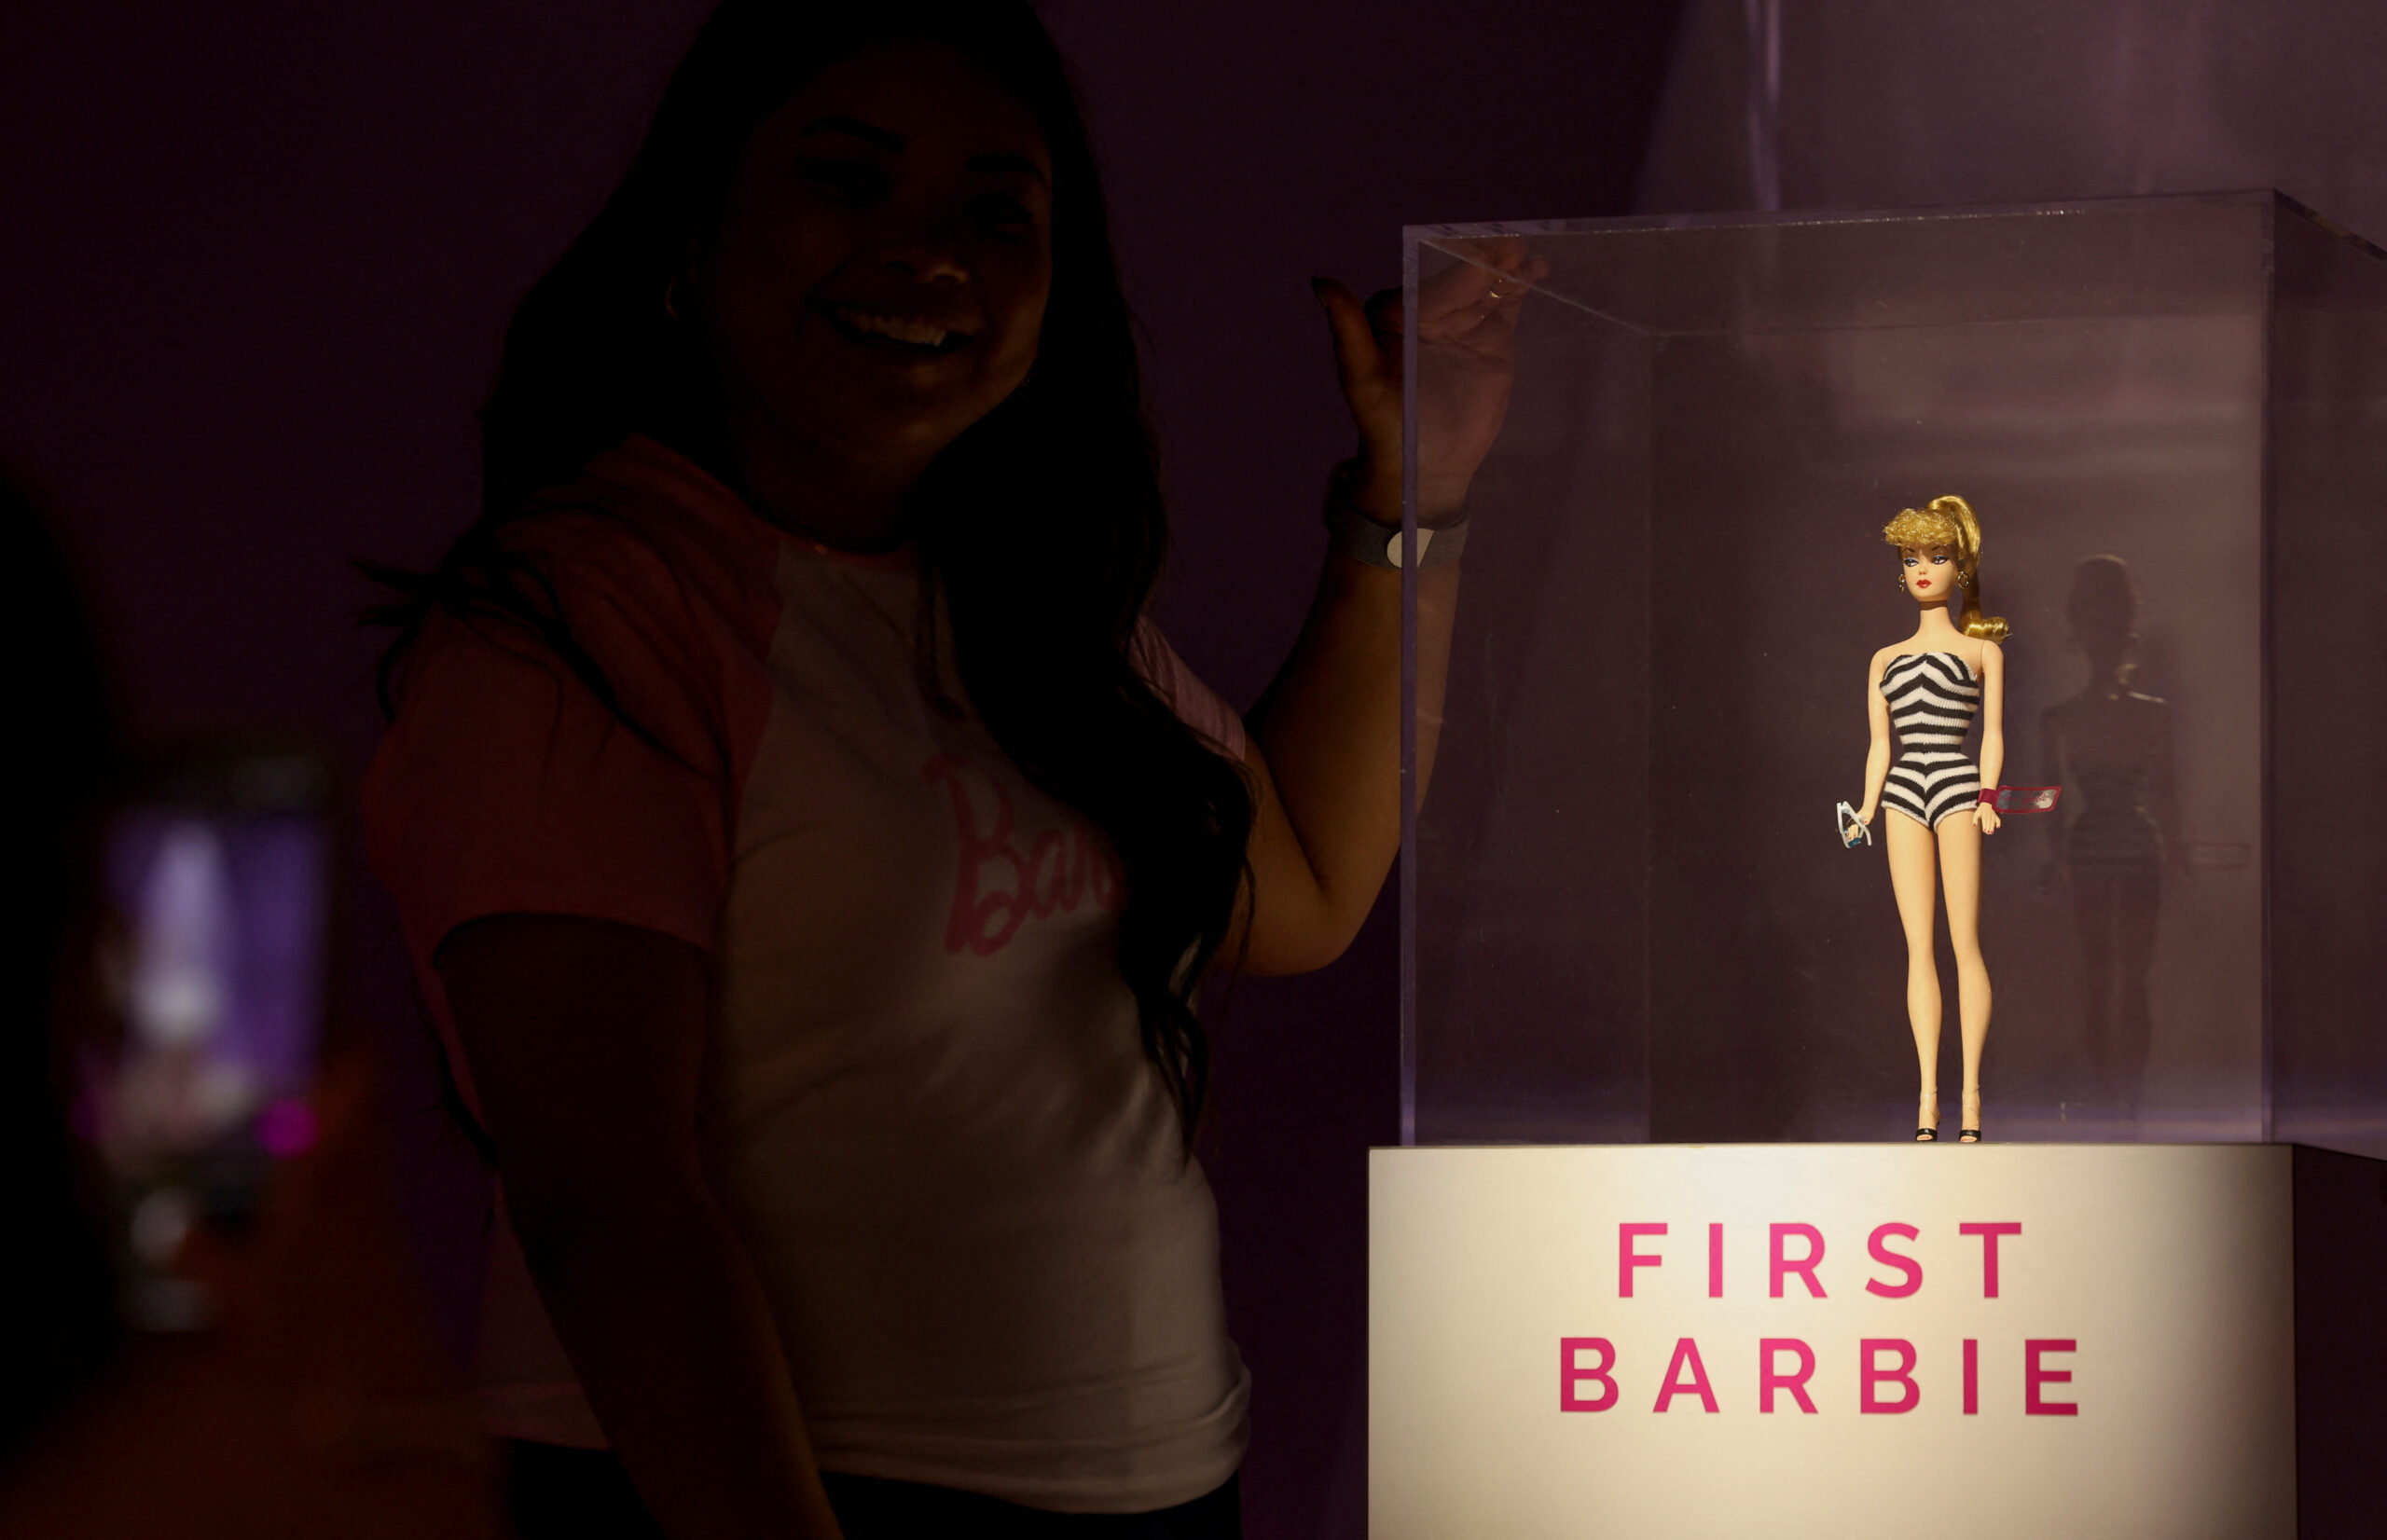 ‘World of Barbie’ experience brings iconic doll into the real world